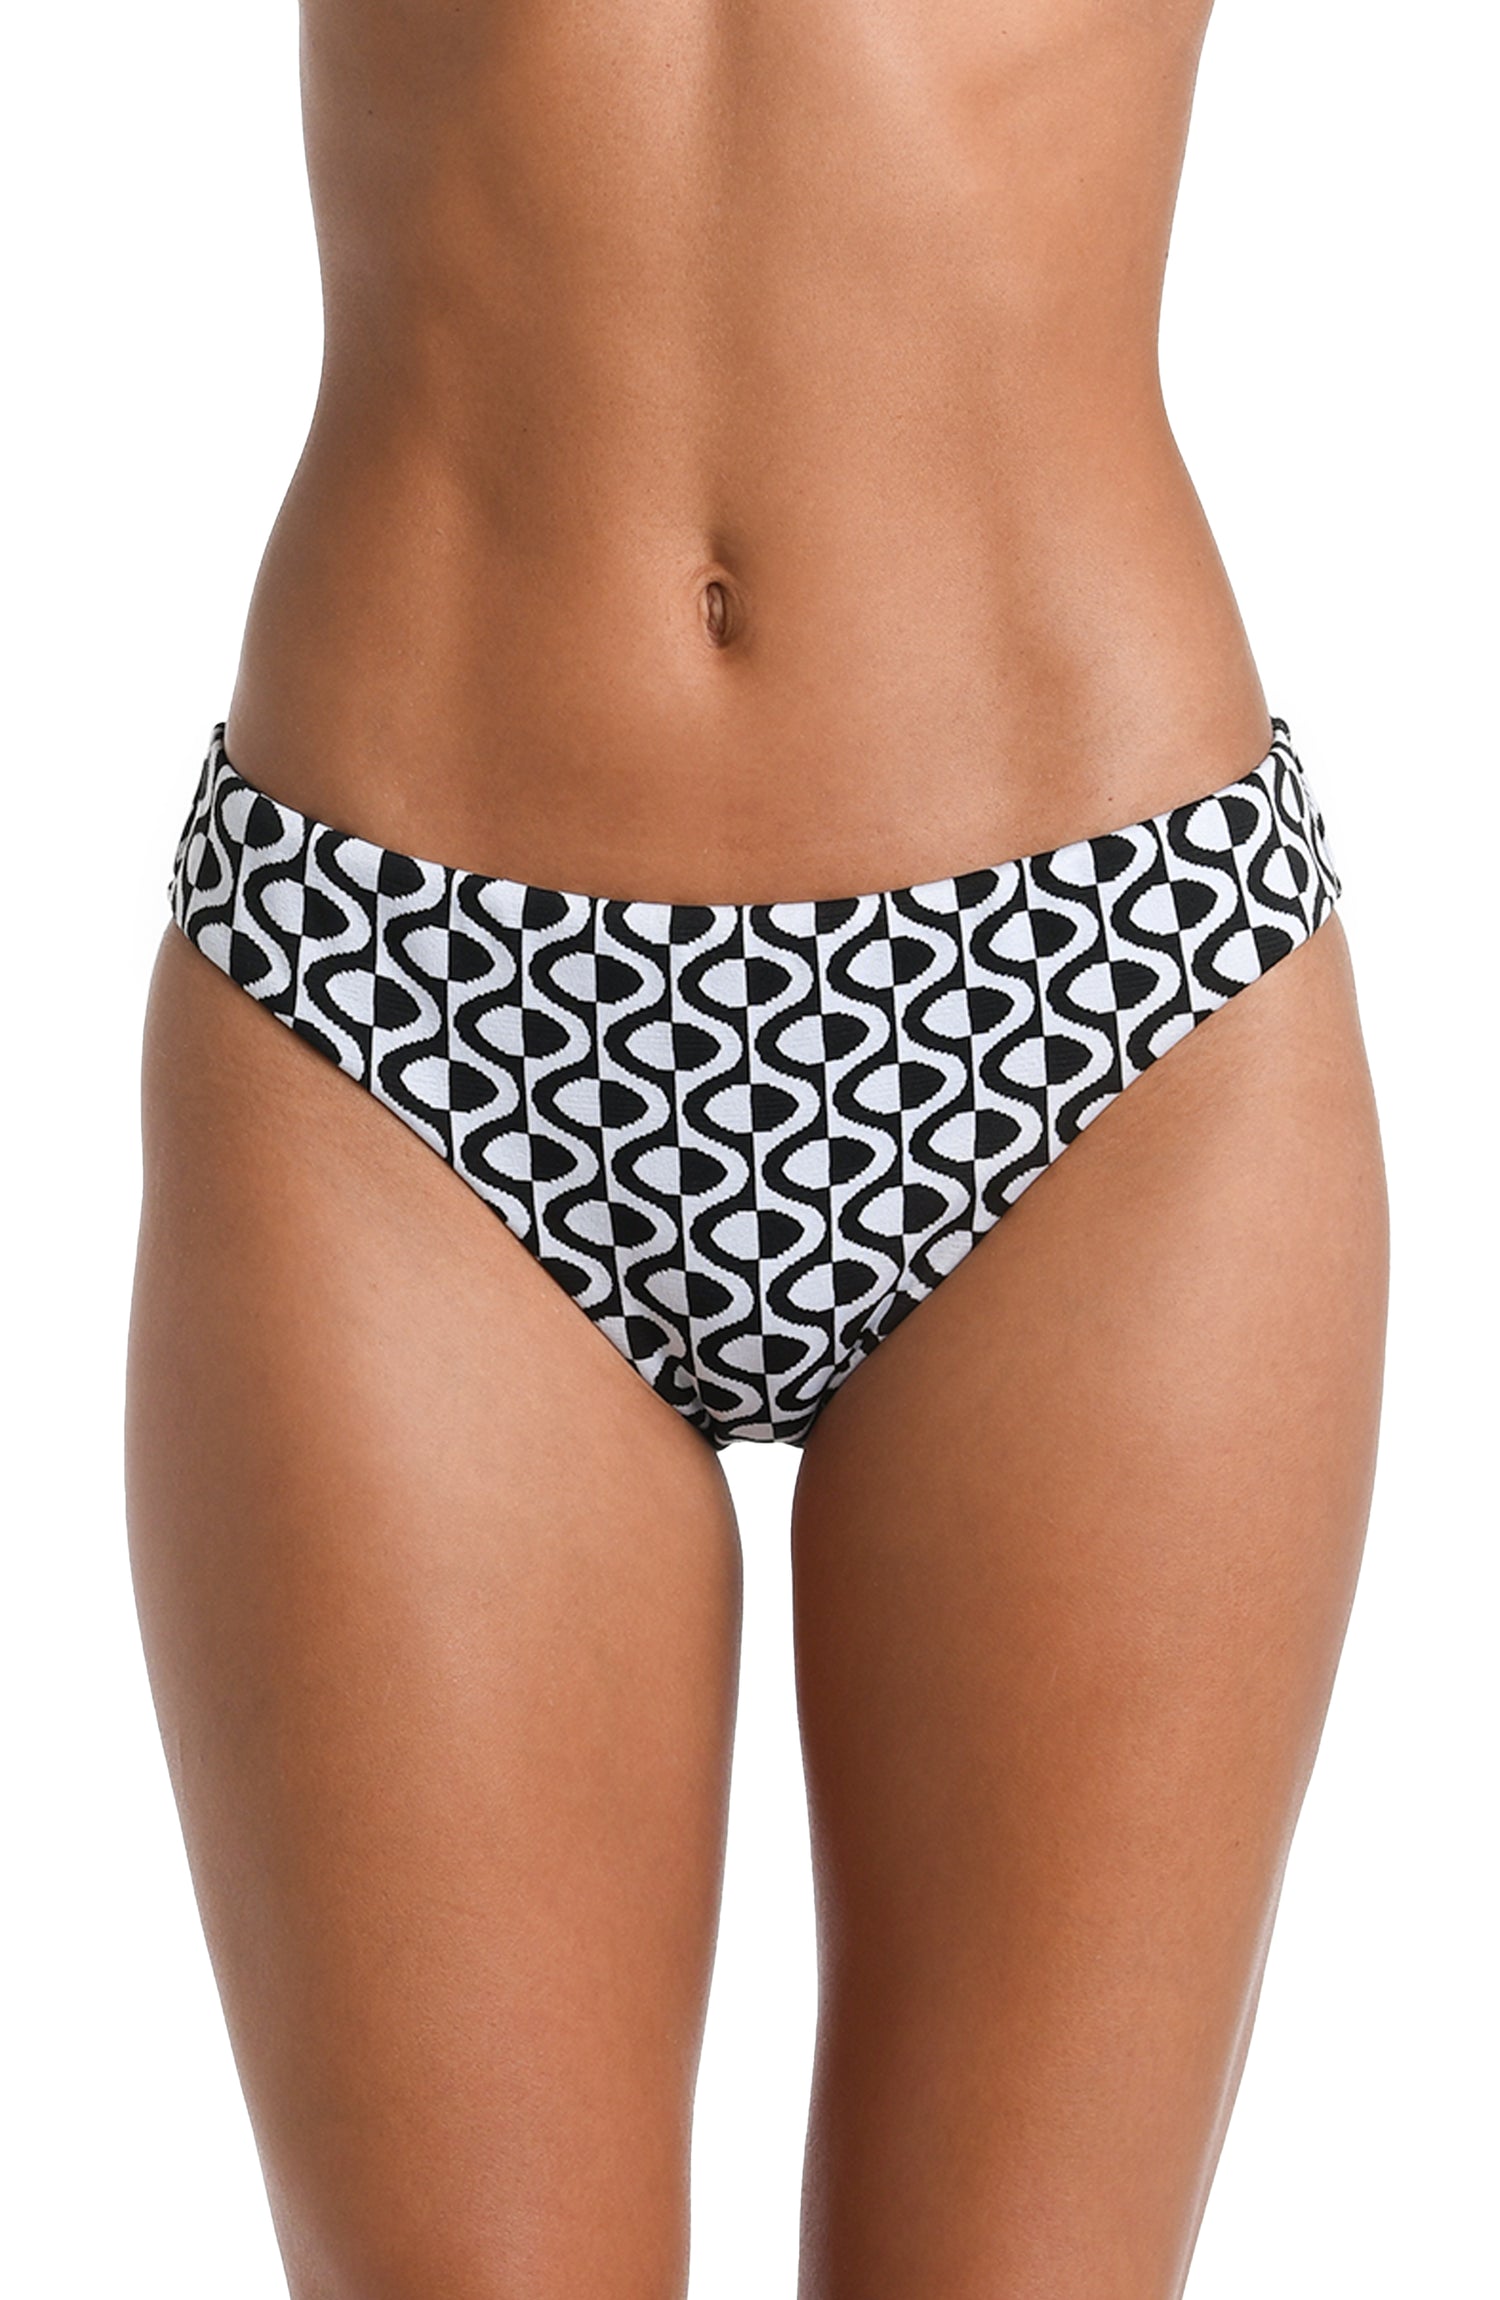 Model is wearing a black and white geometric patterned Hipster Bottom